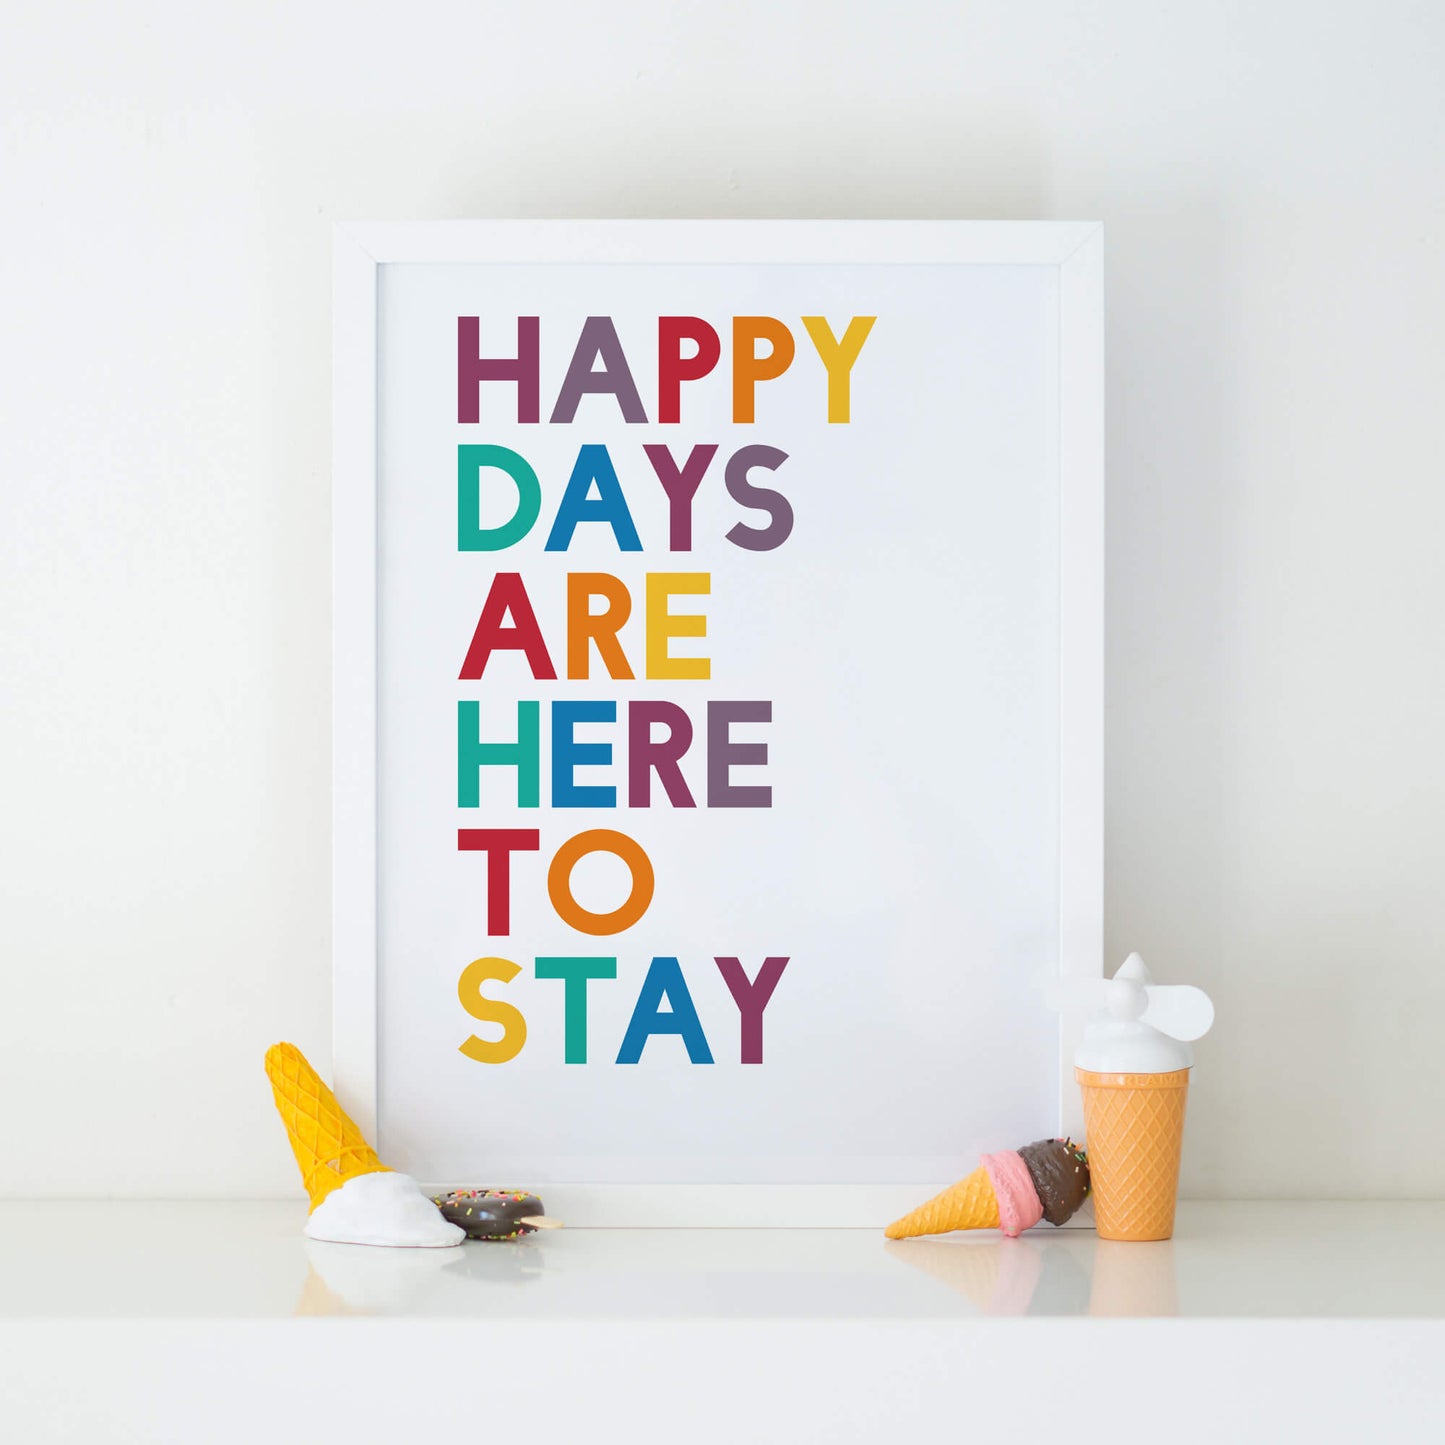 Happy Days Are Here To Stay Print by SixElevenCreations. Product Code SEP0213